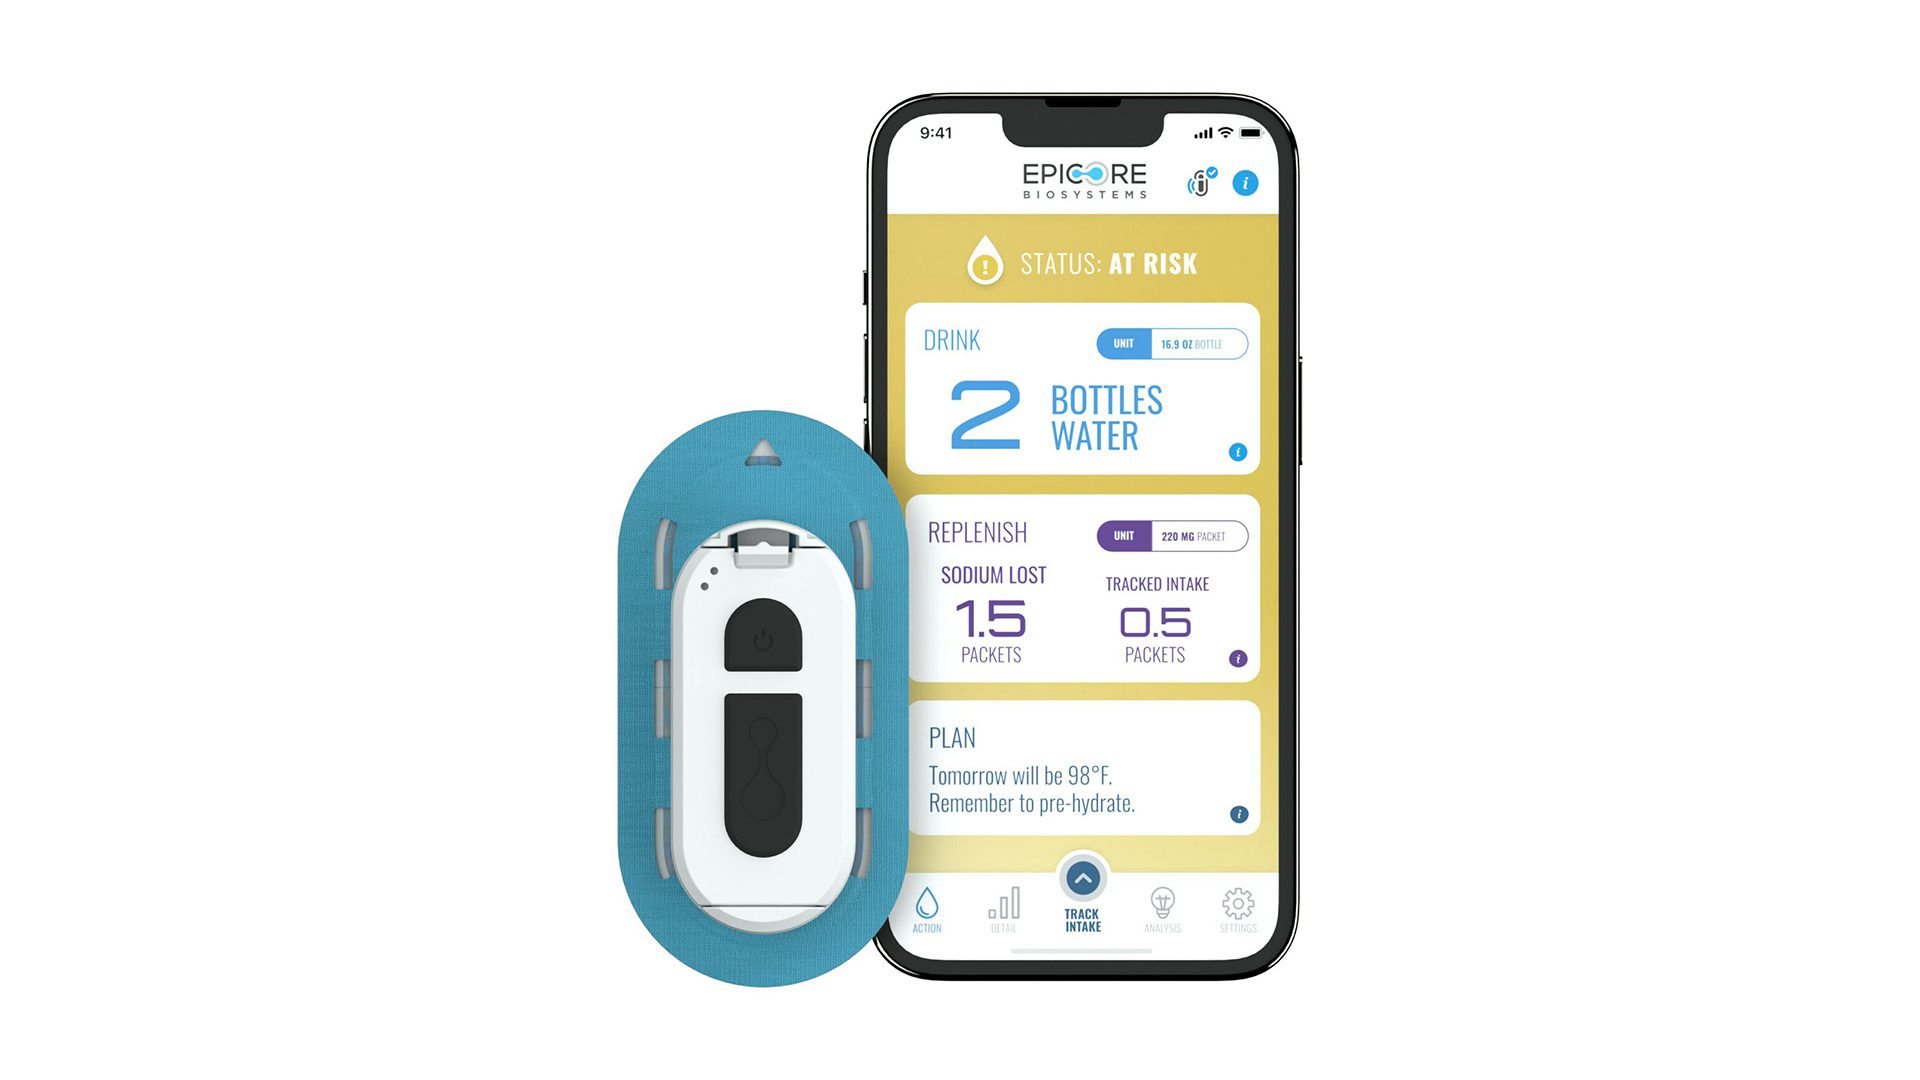 Epicore's Connected Hydration wearable